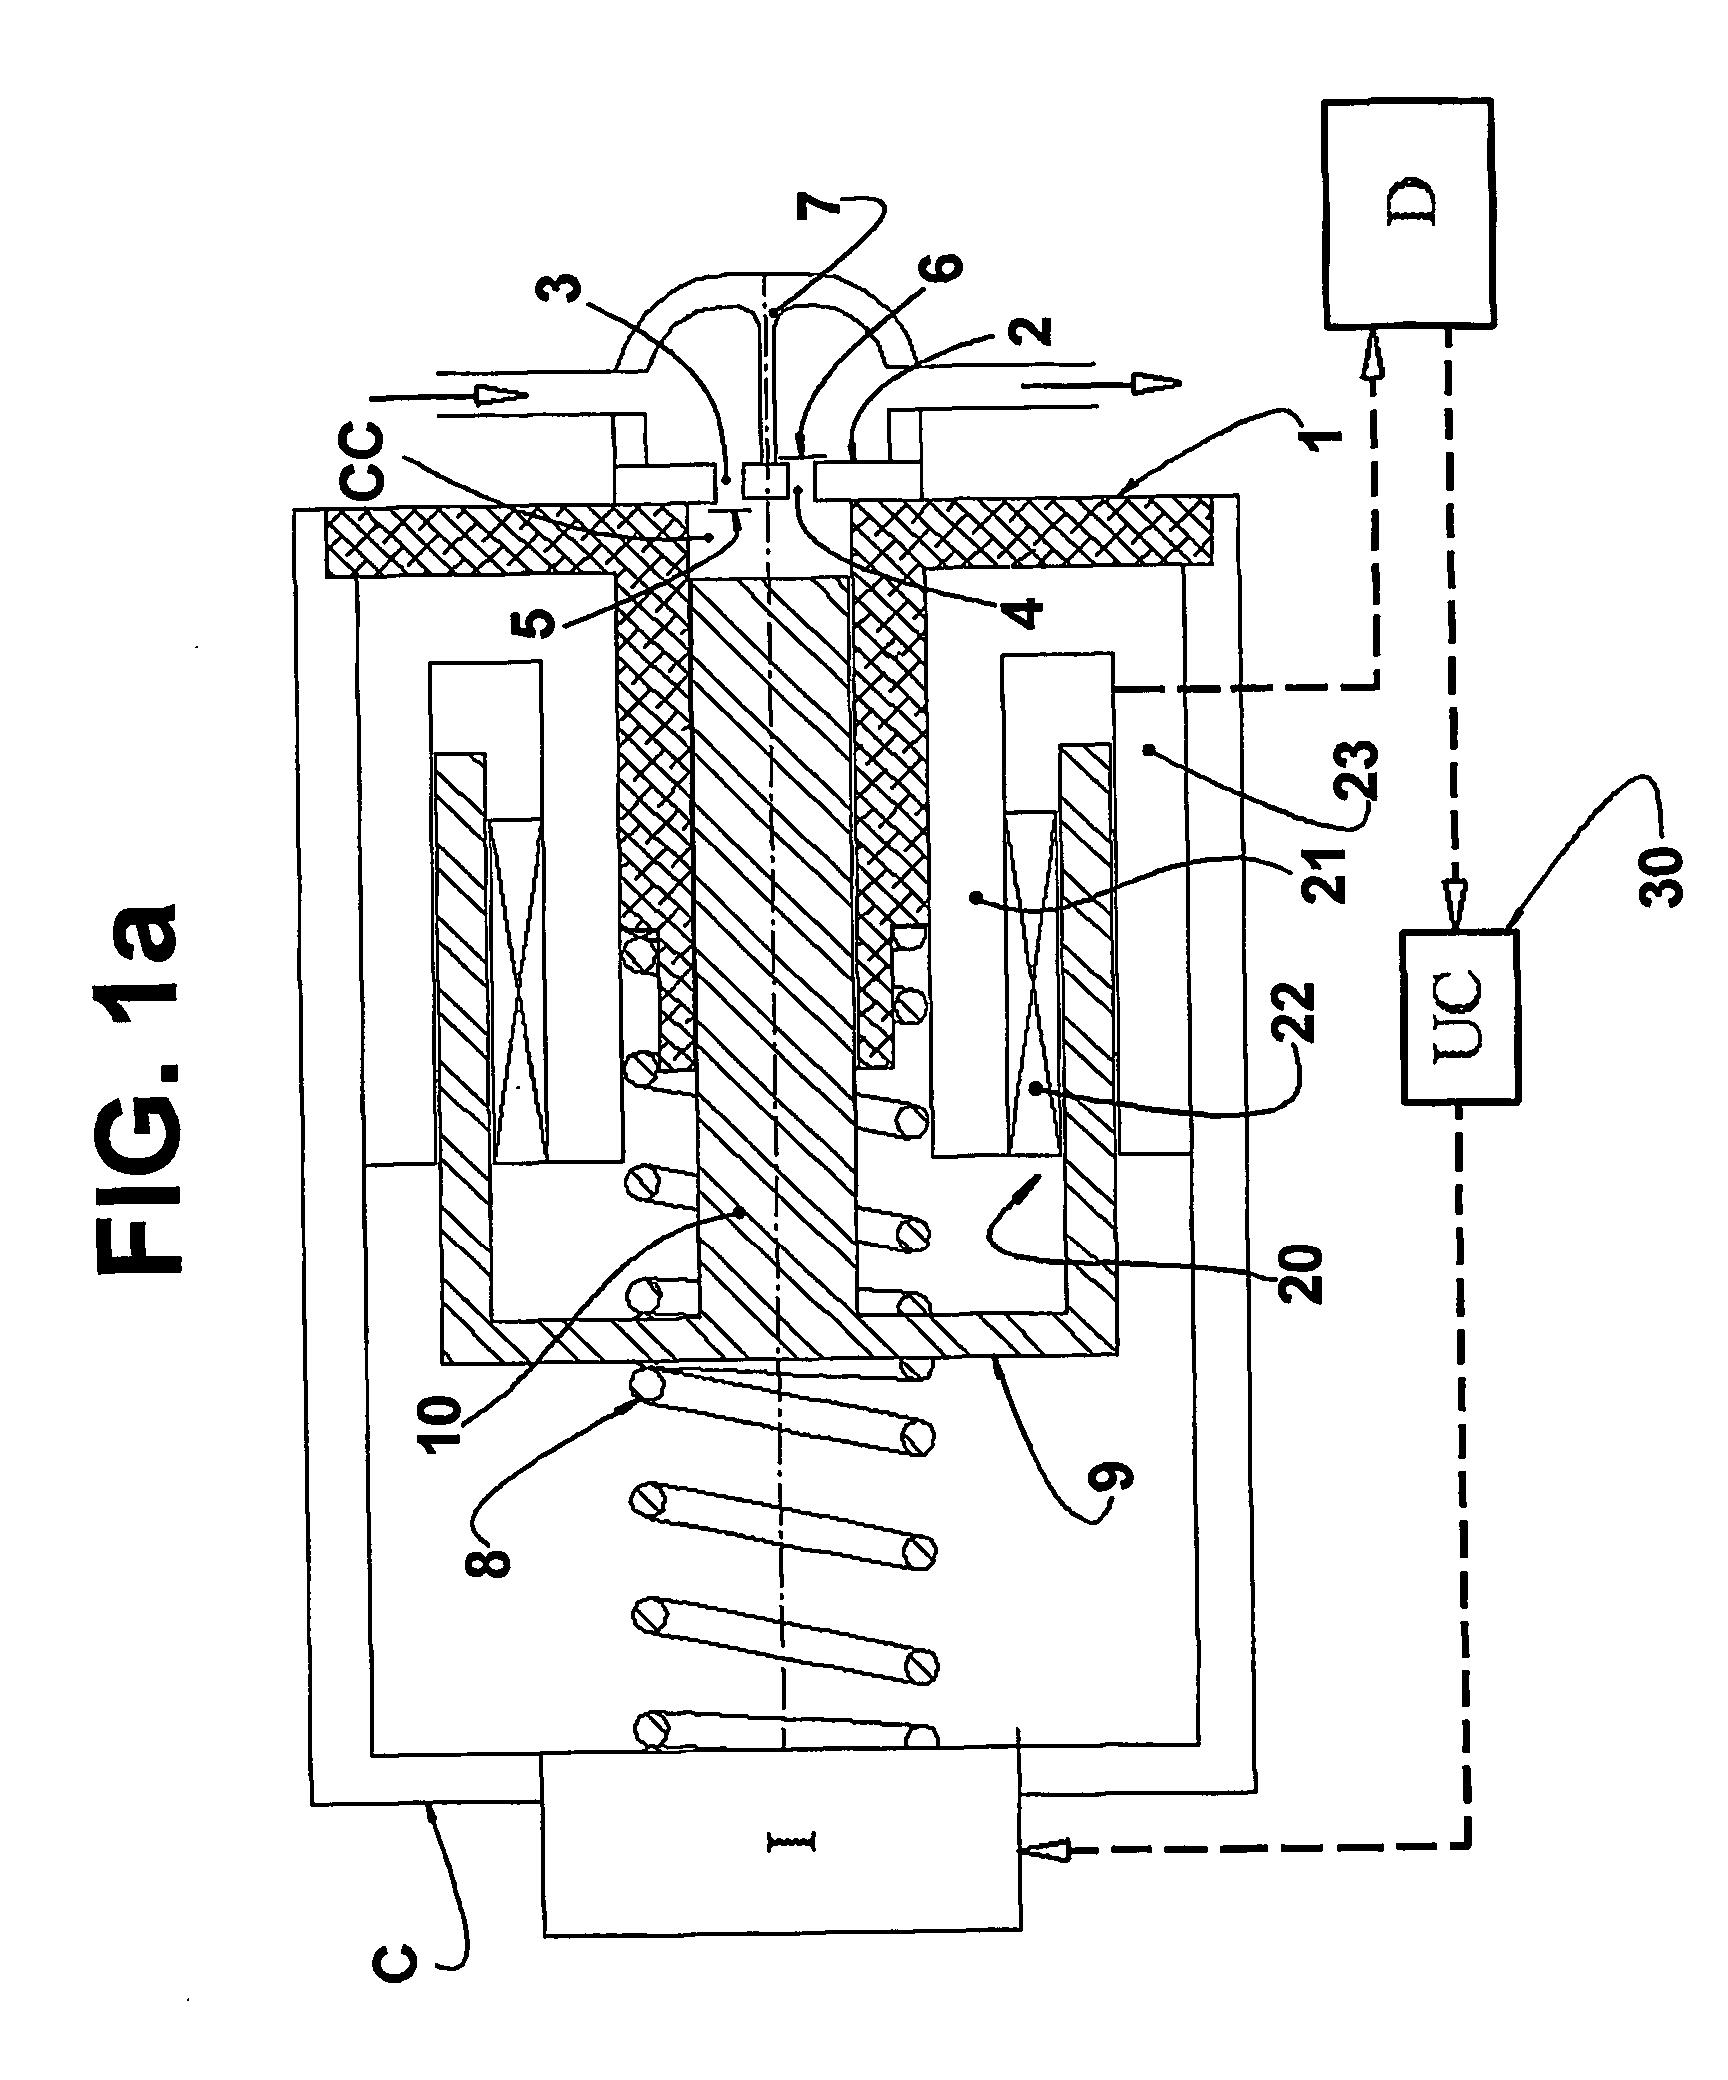 System for adjusting resonance frequencies in a linear compressor